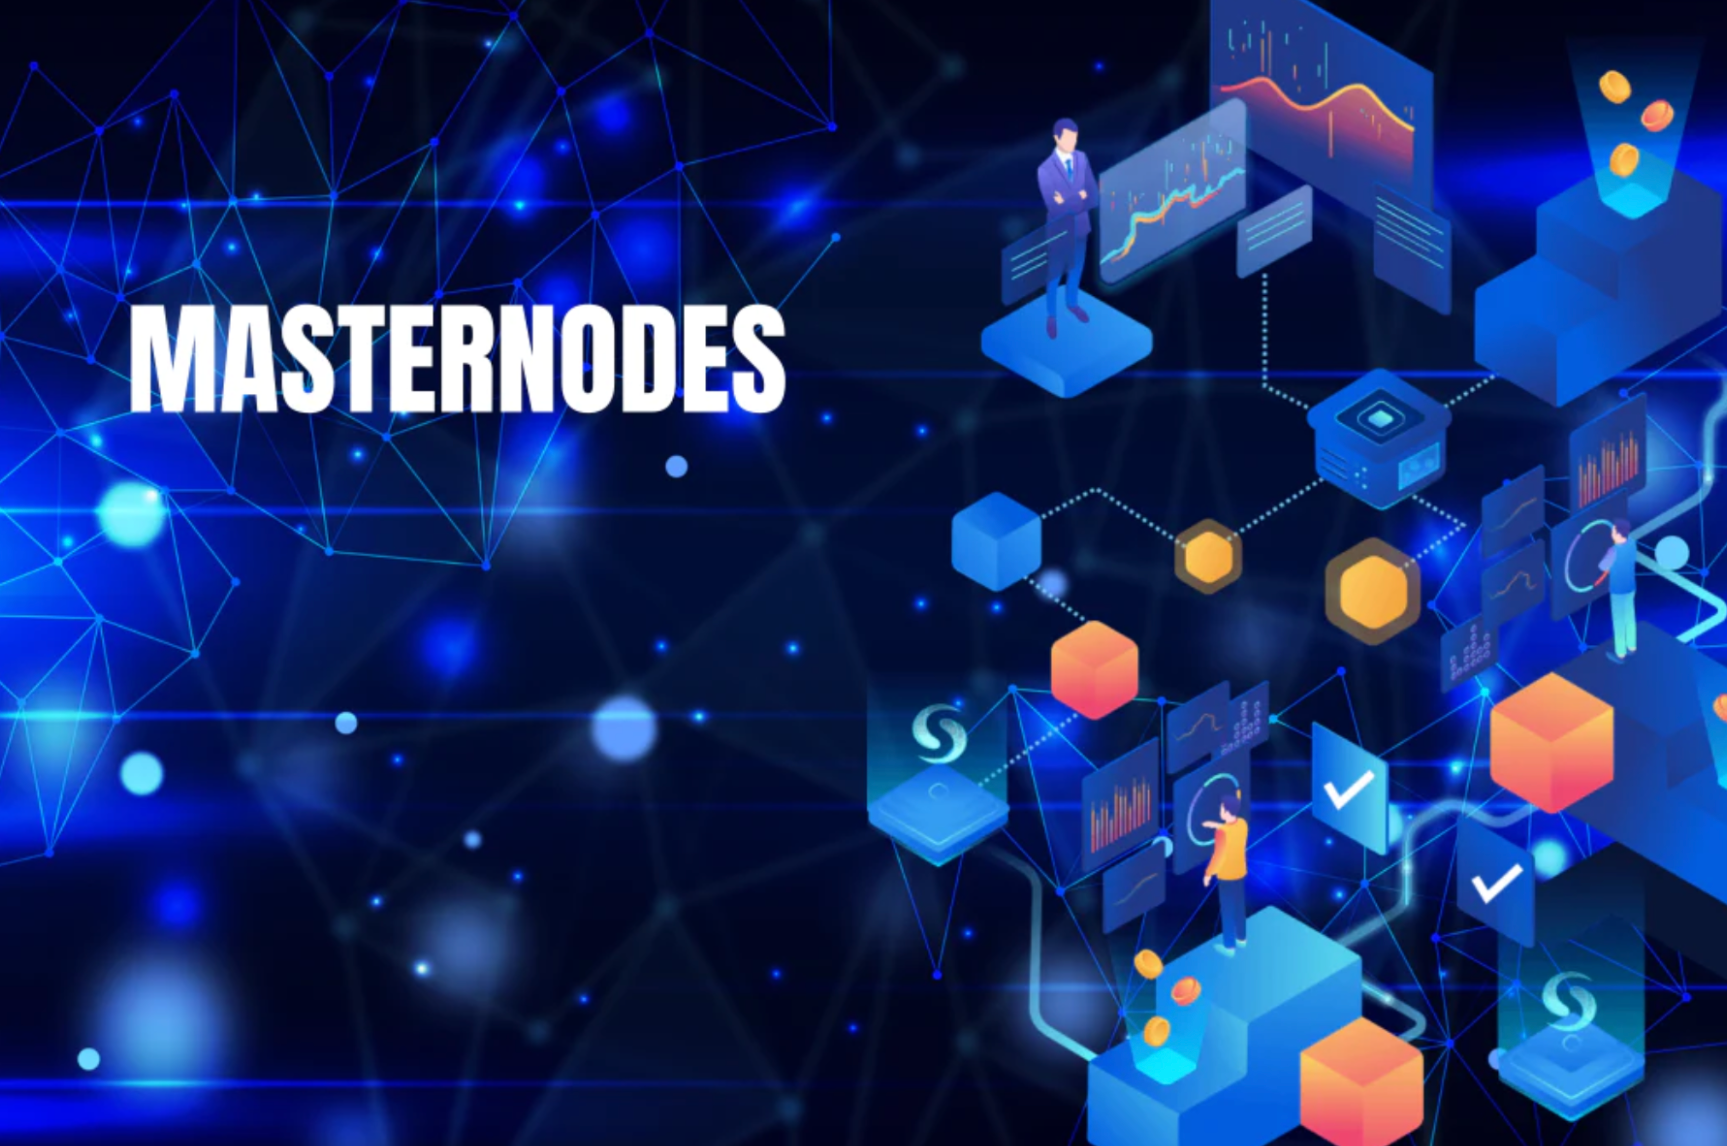 What are masternodes? What is their functionality?